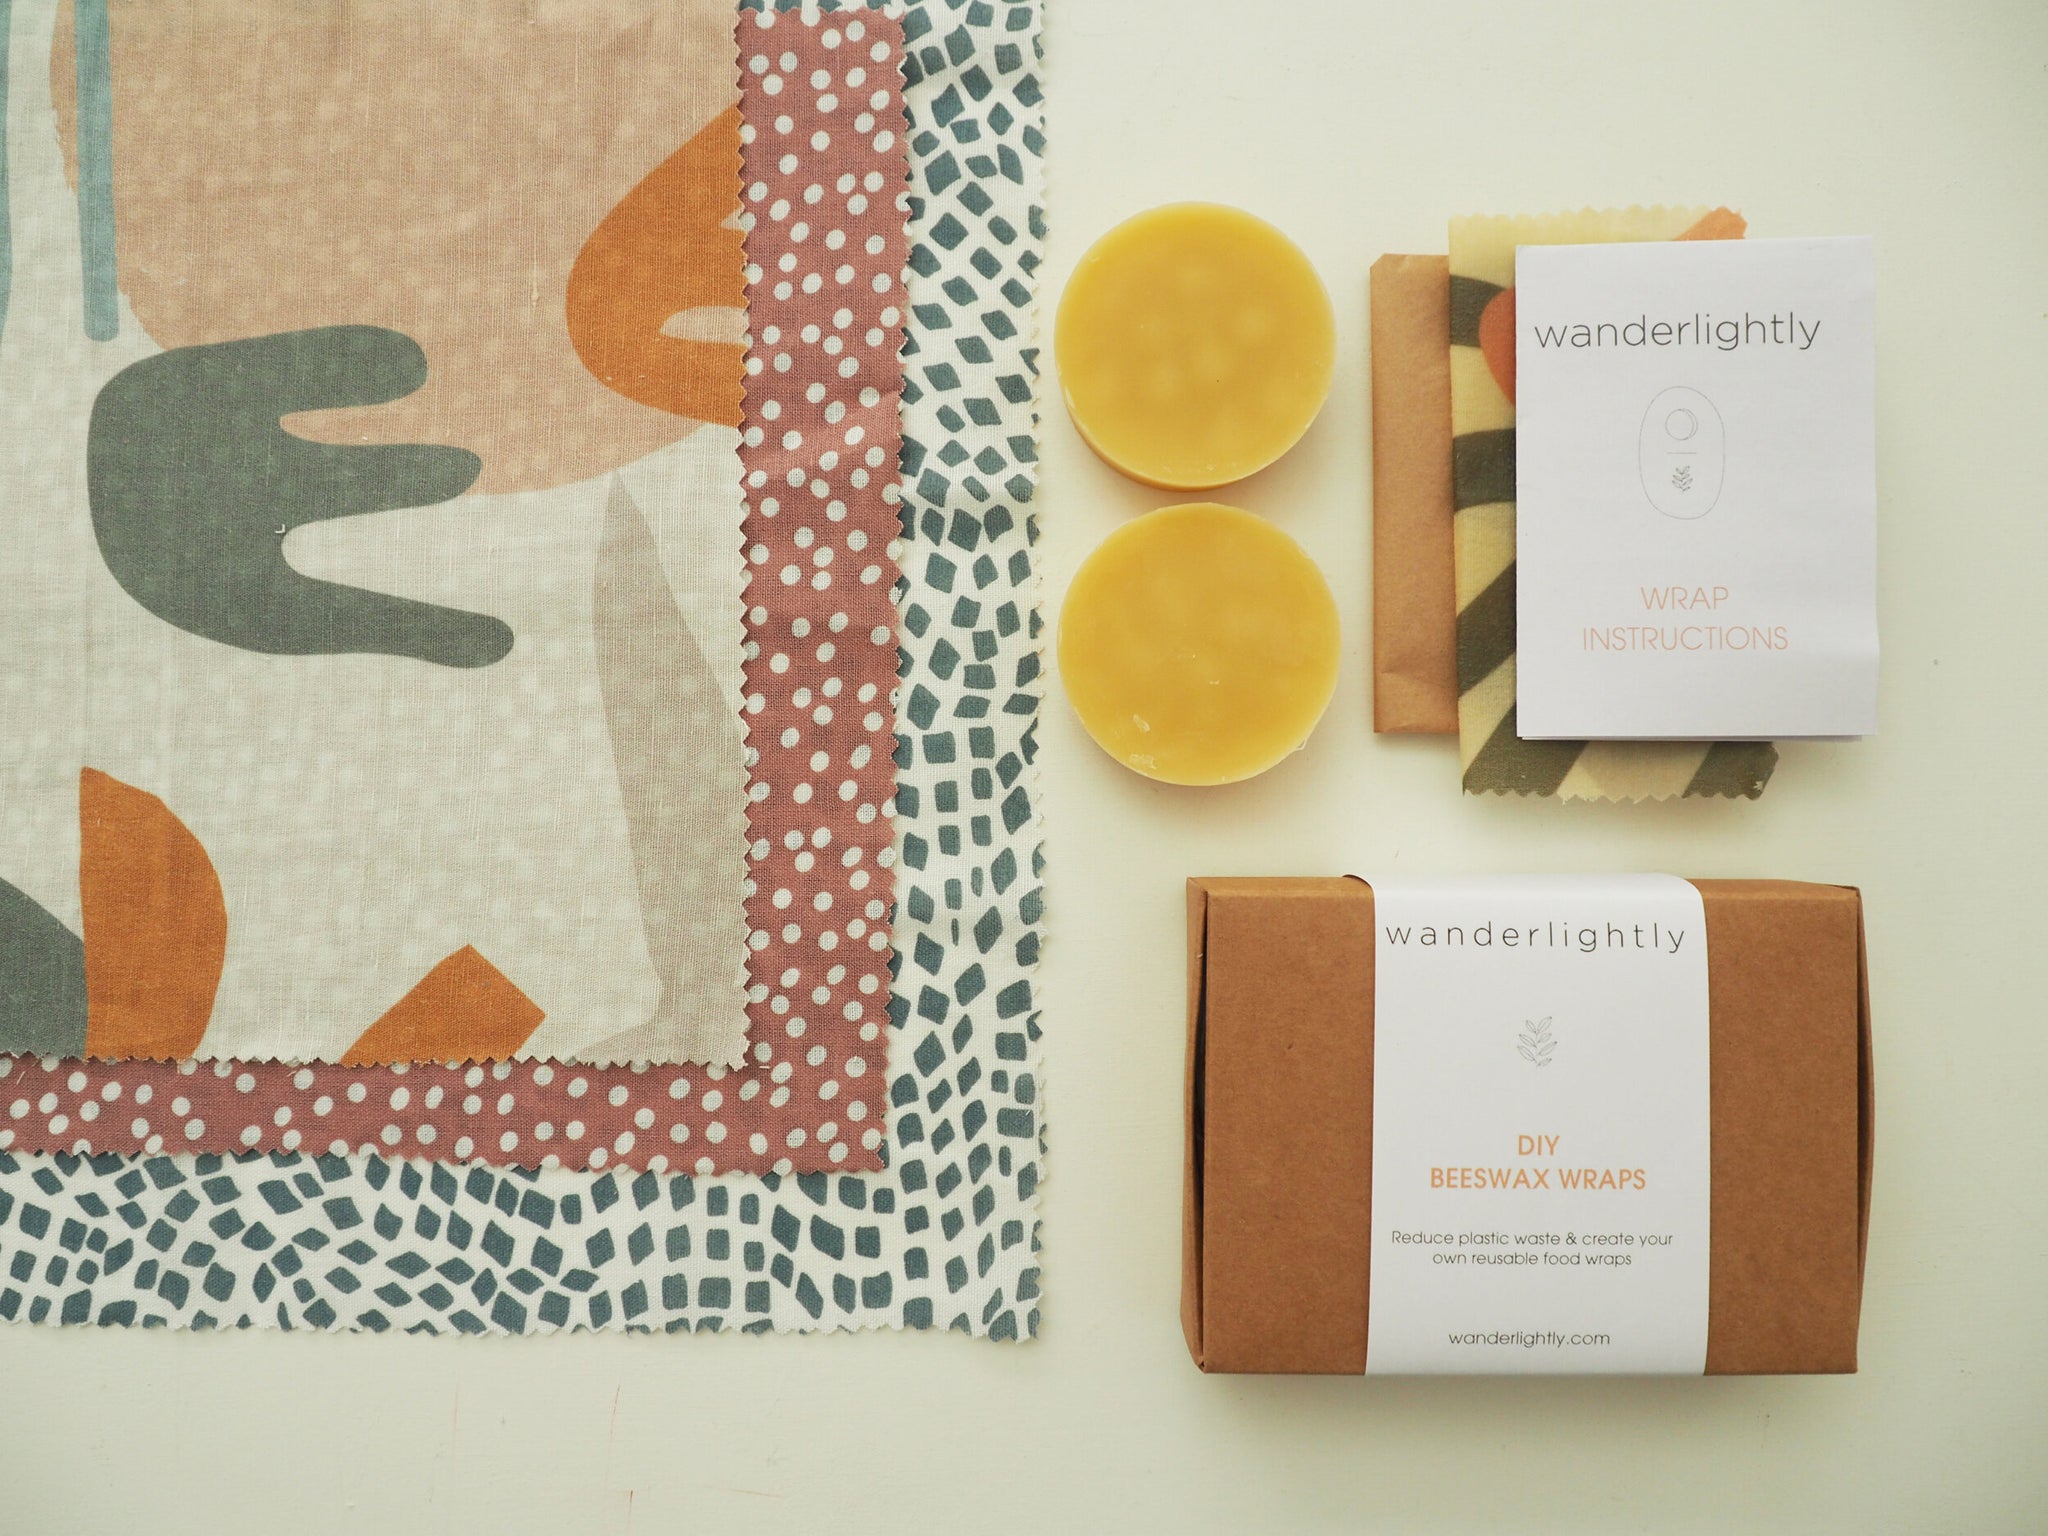 Deluxe beeswax wrap kit